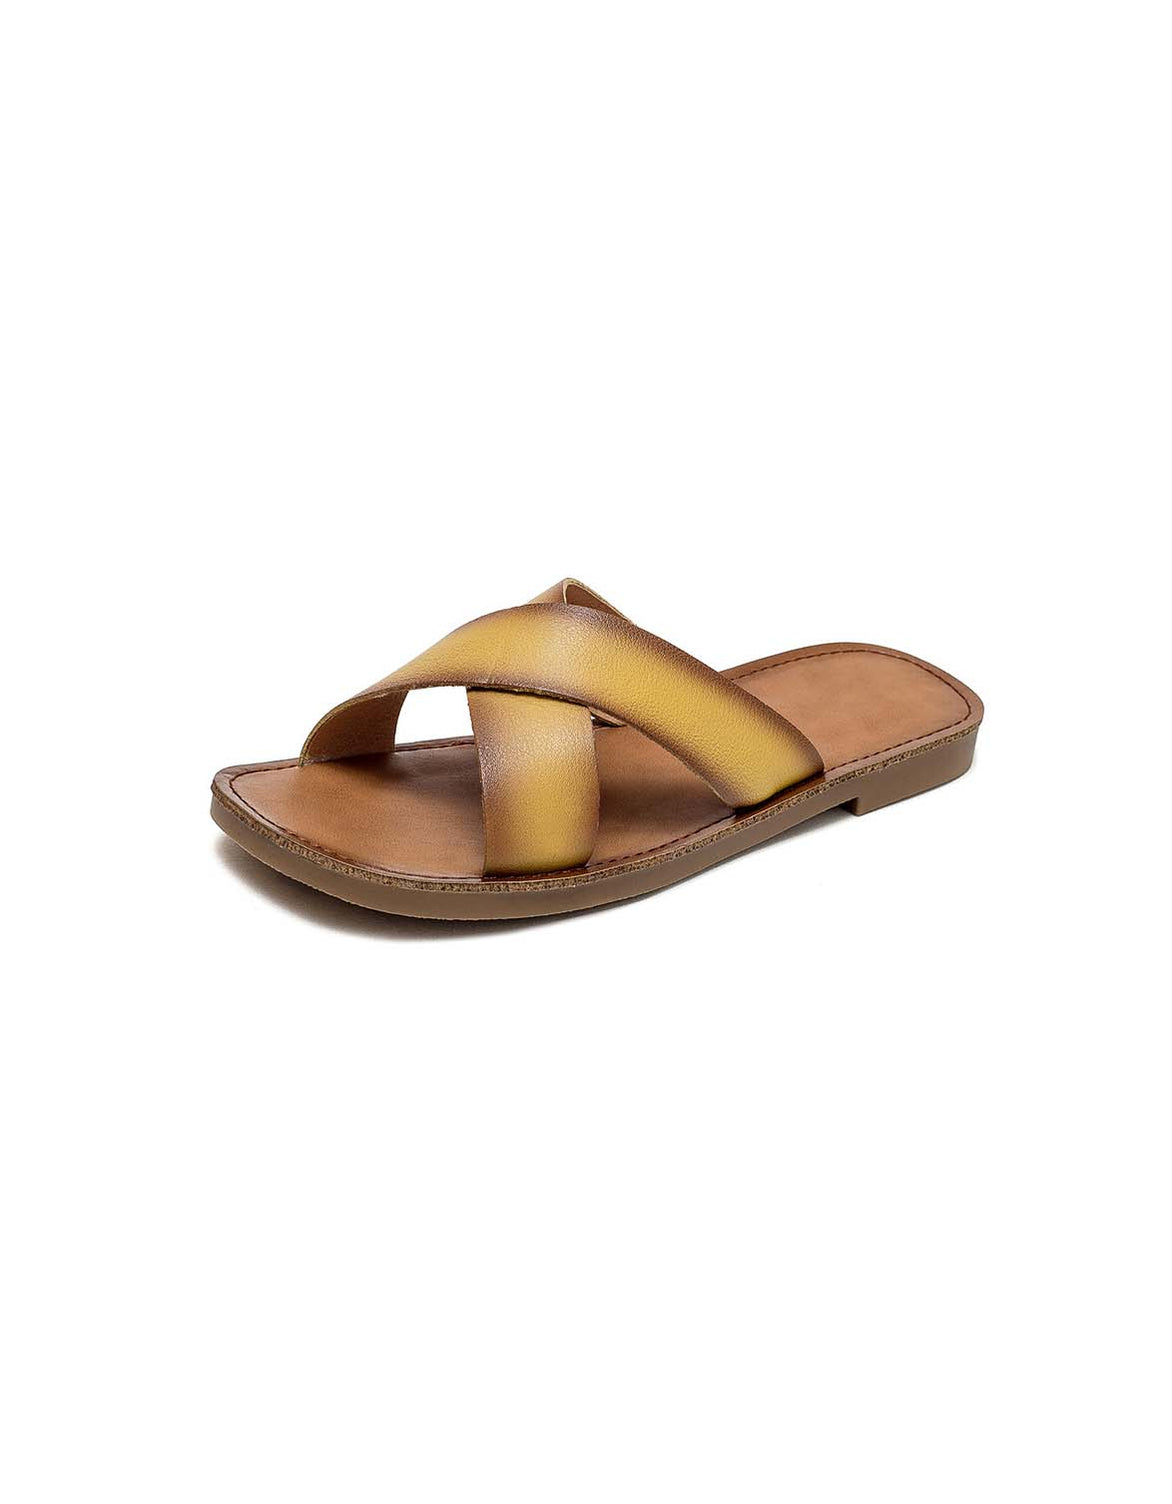 Women's Comfortable Leather Slippers | Mules — Obiono